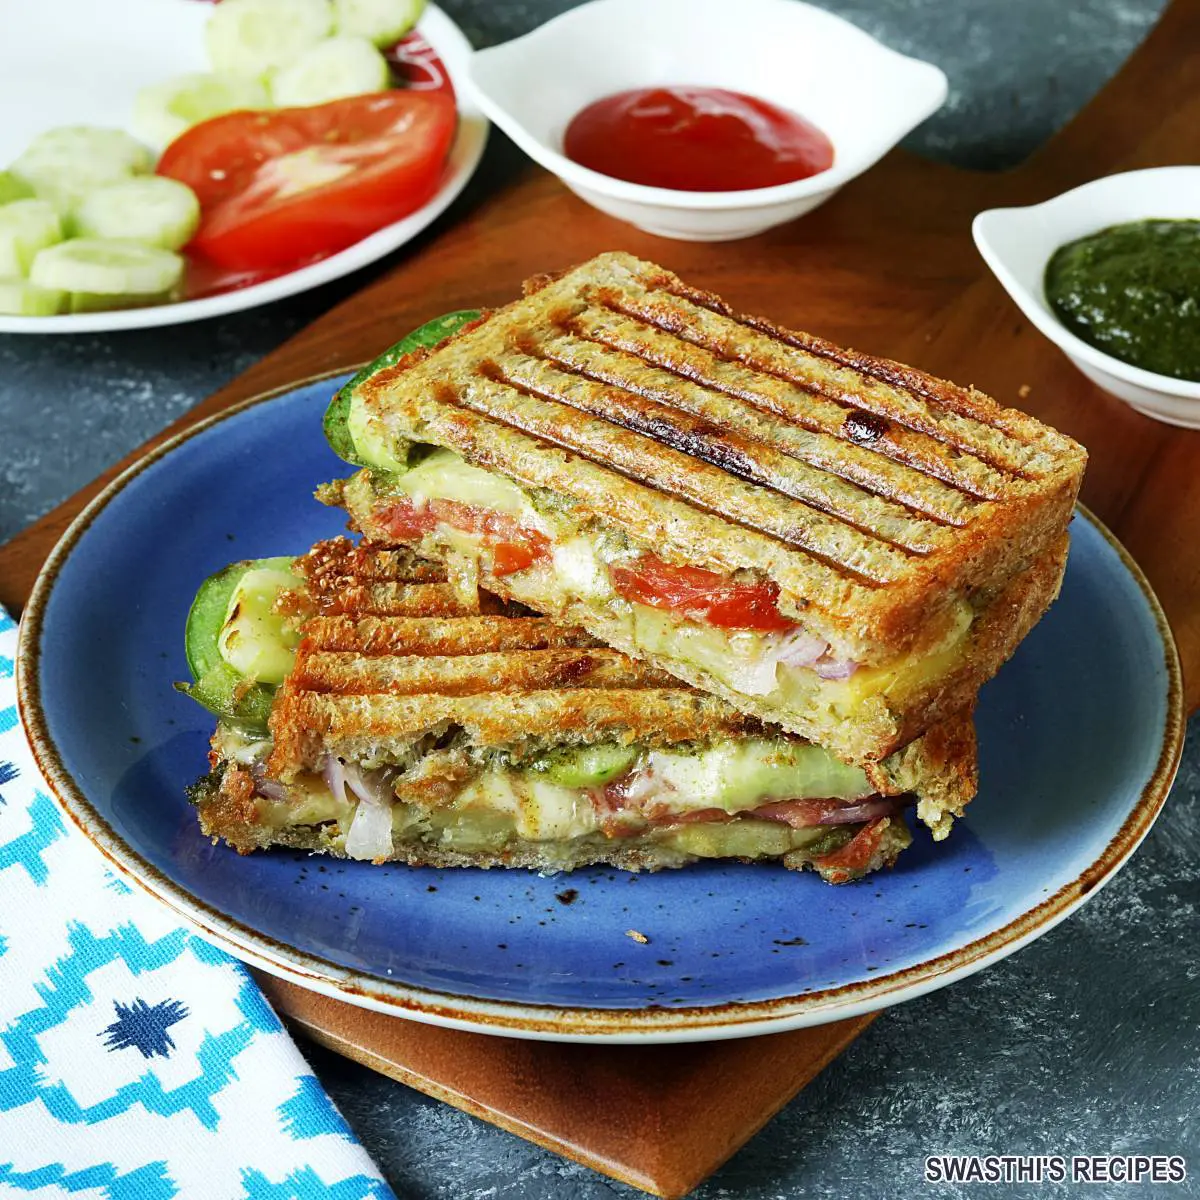 Veg Grilled Sandwich made with vegetables, cheese, chutney and spices